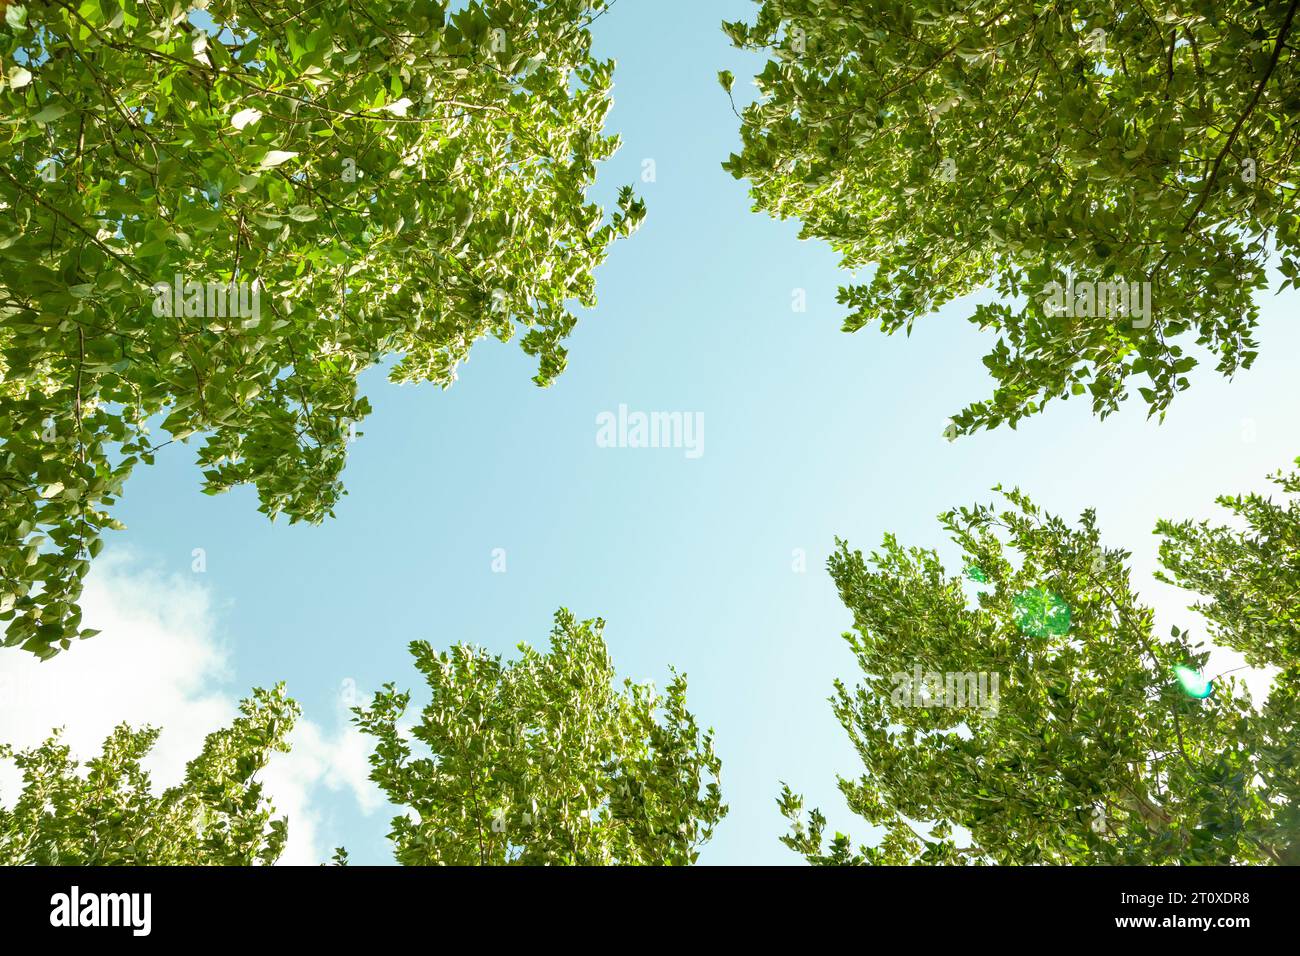 Canopy of downy birch trees with green leaves, low angle view against pale blue sky Stock Photo